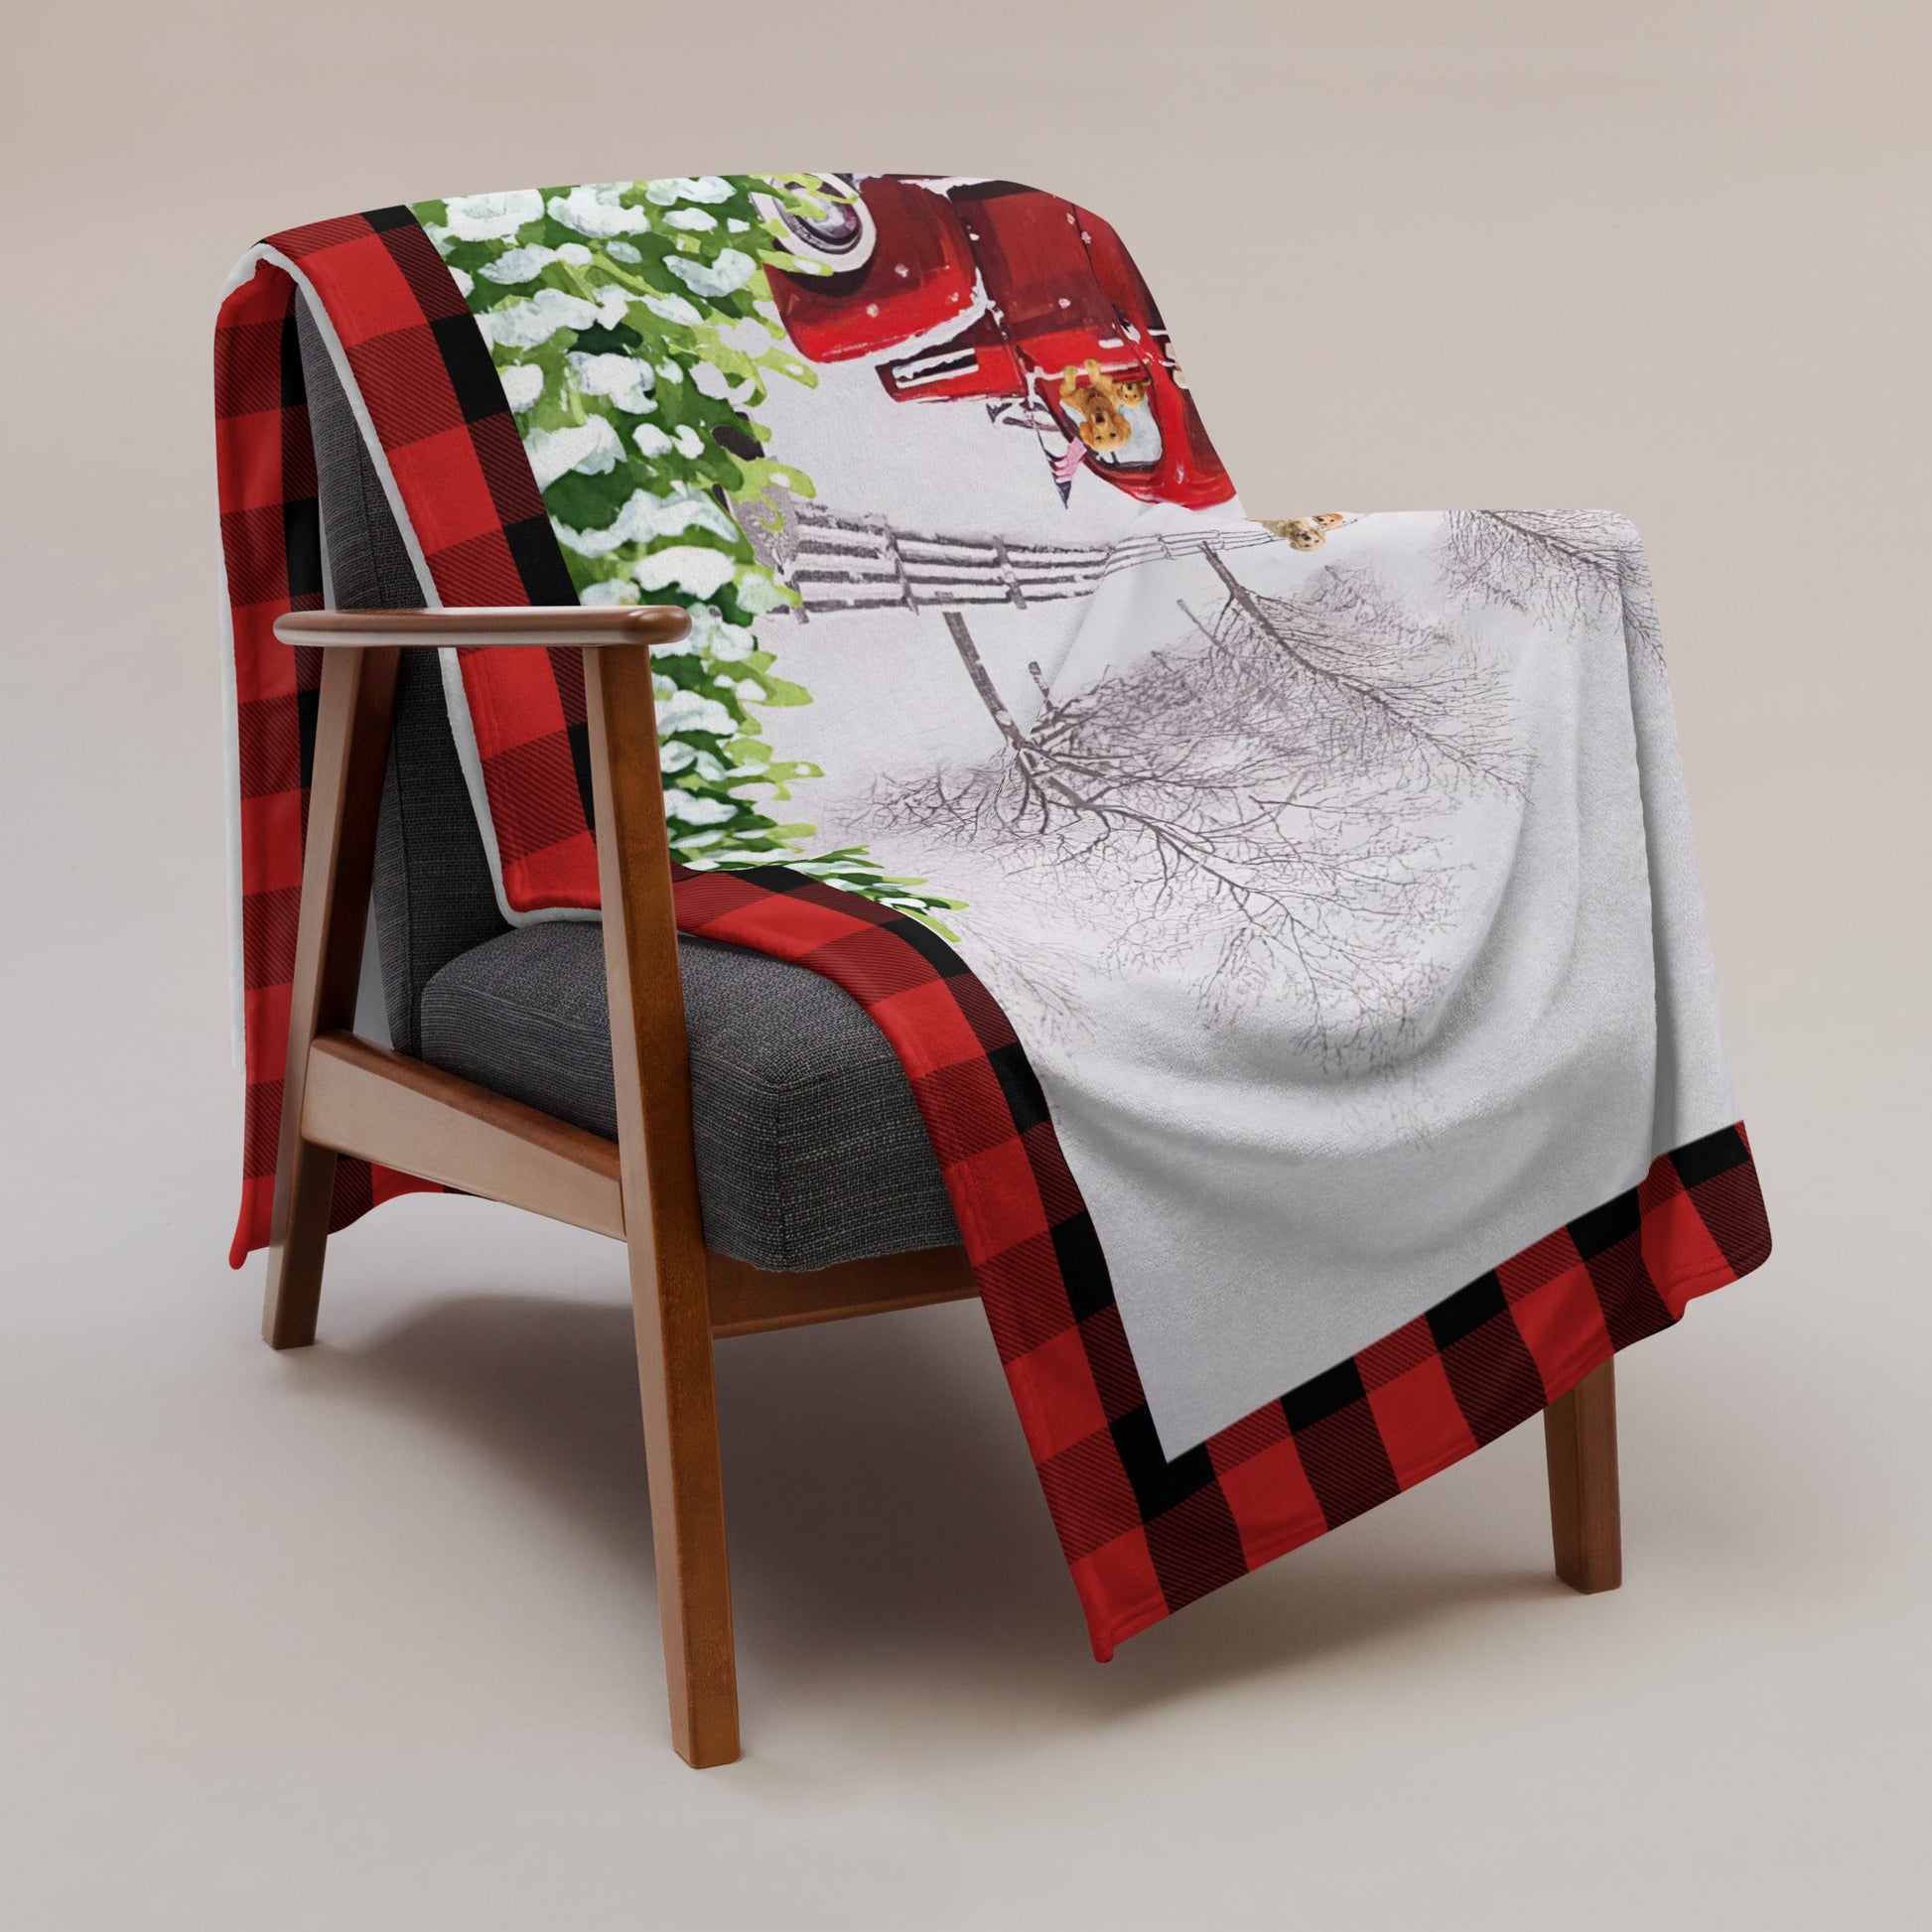 Dog Lovers Old Fashioned Christmas Throw Blanket - DoggyLoveandMore